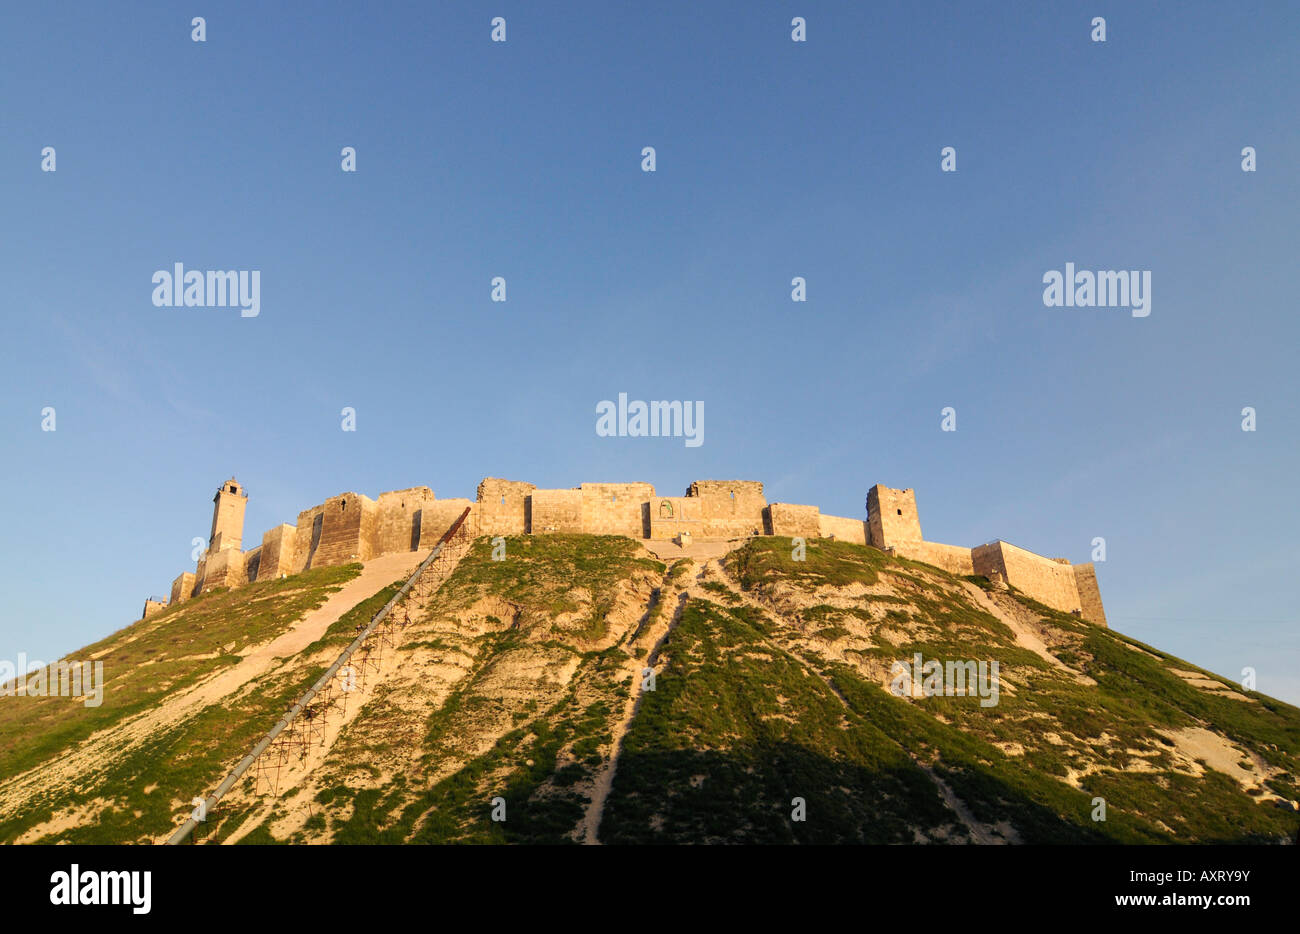 A view of the citadel in the old town of Aleppo, Syria Stock Photo